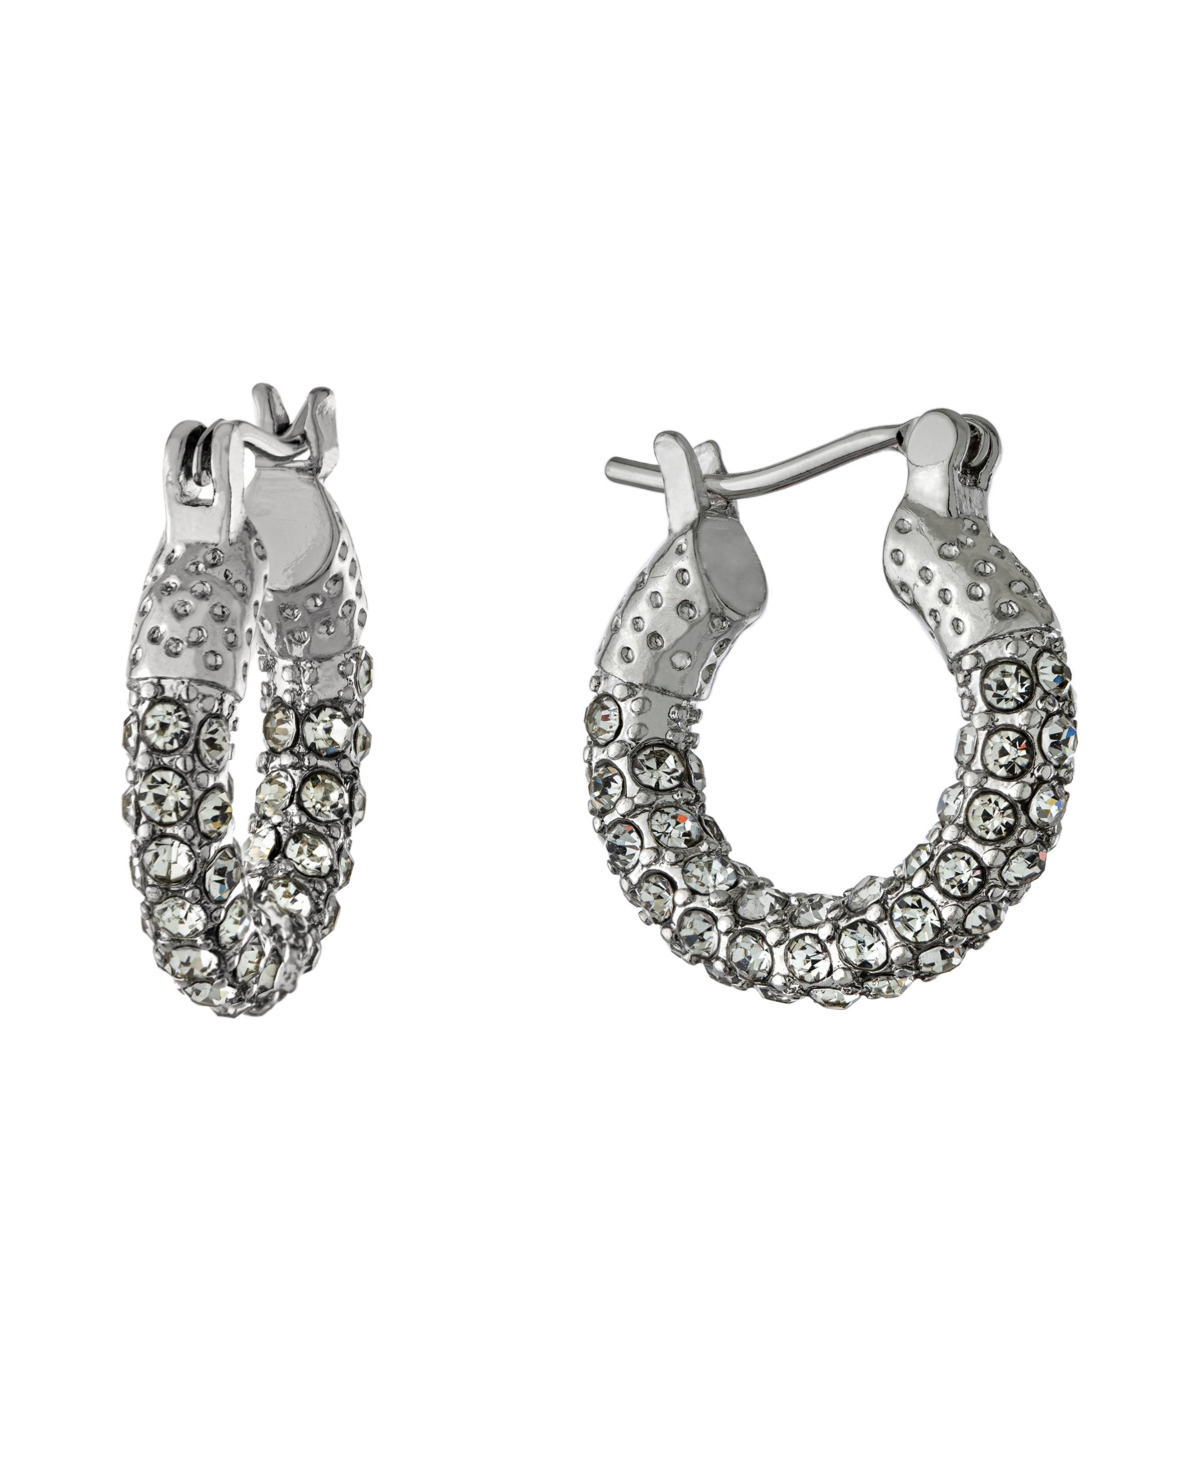 15mm All Over Crystal Click Top Hoop Earrings in Gold Over or Silver Plated - Gold